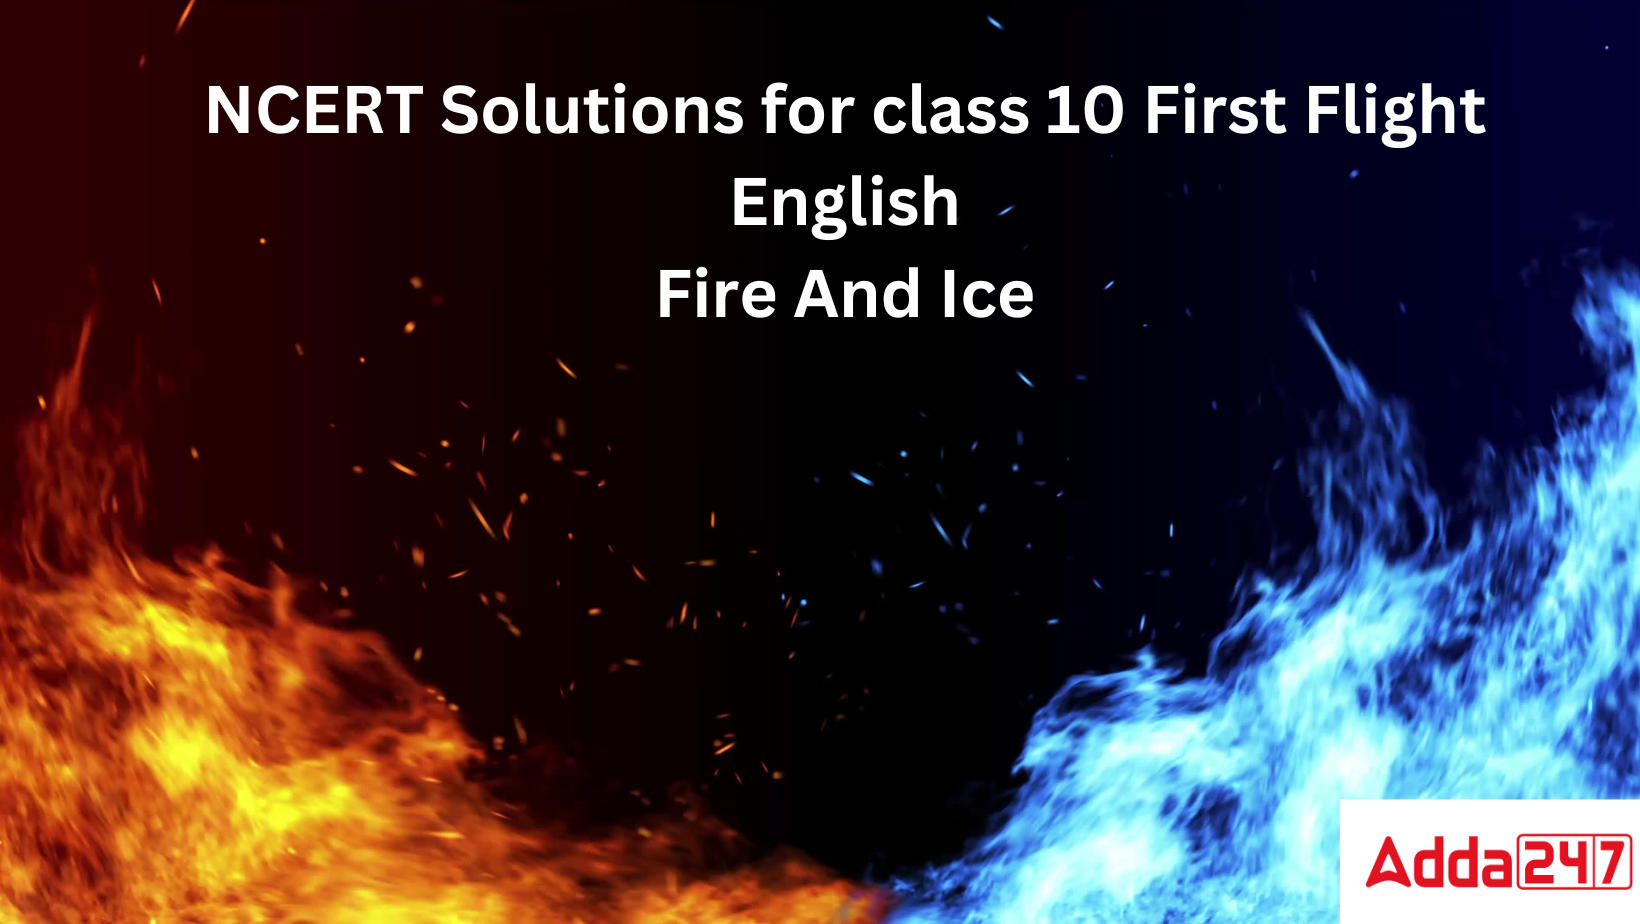 NCERT Solutions for class 10 First Flight English Fire And Ice